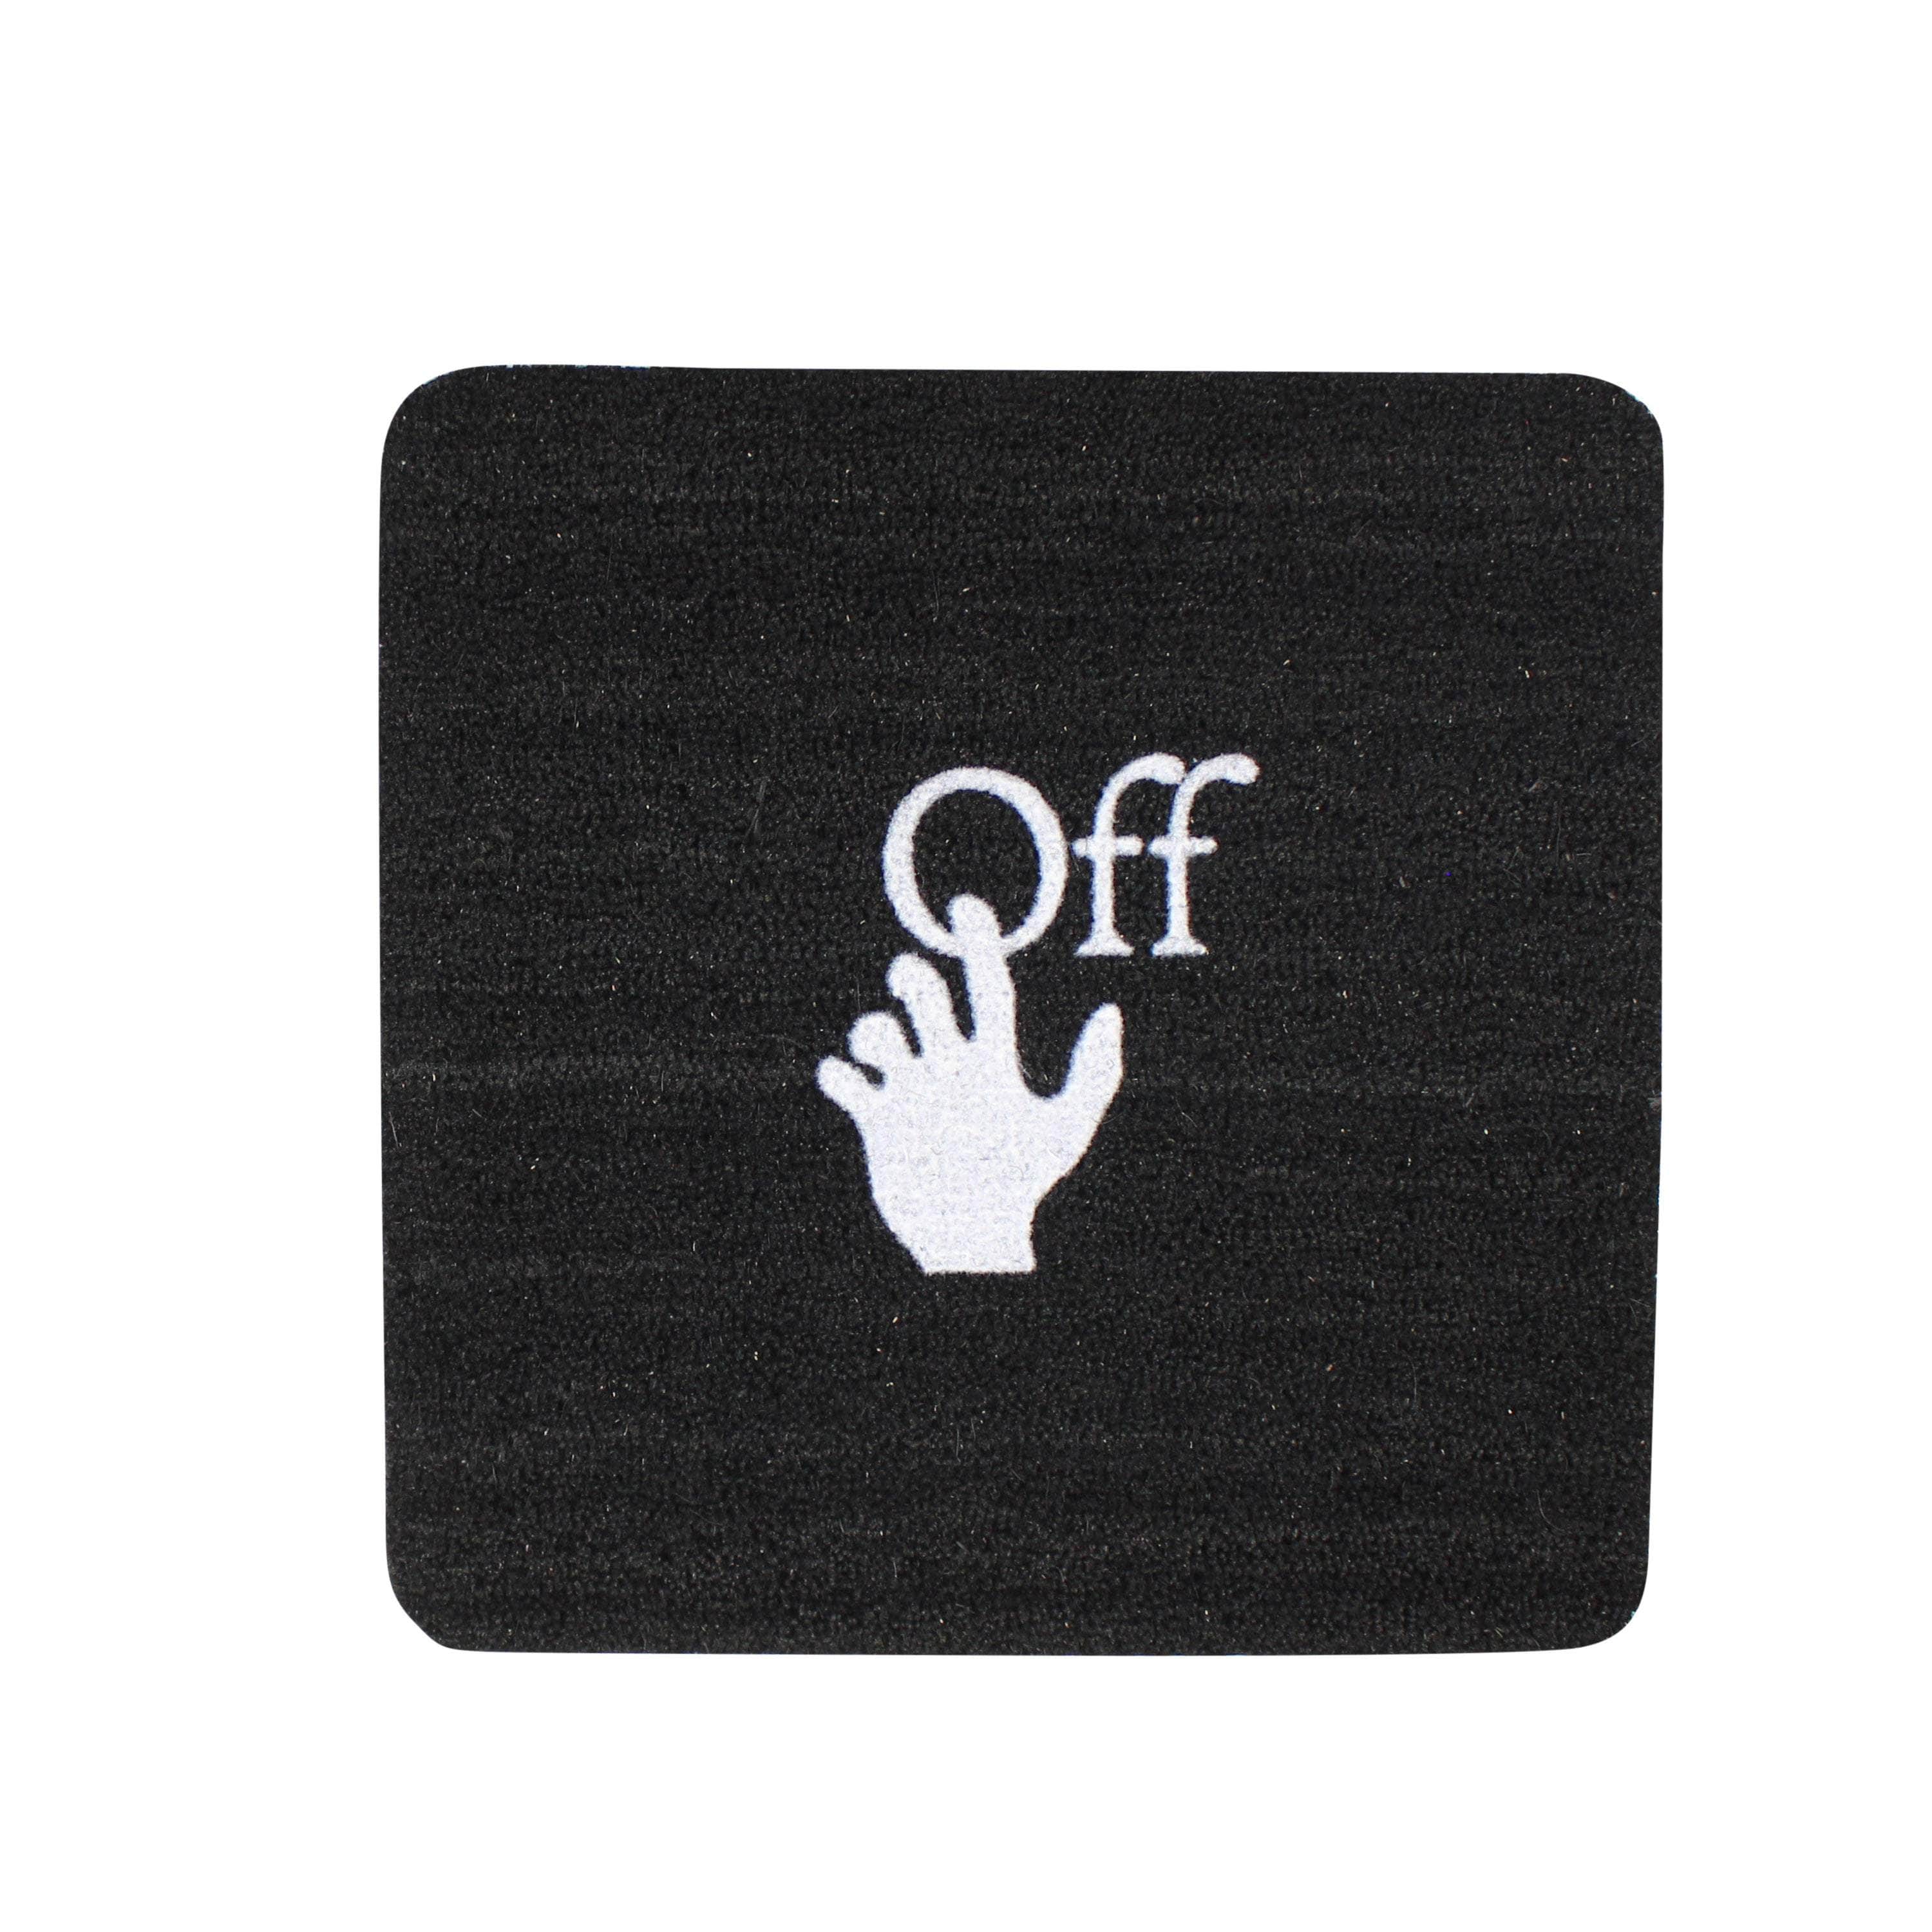 Off-White c/o Virgil Abloh channelenable-all, chicmi, couponcollection, kitchen-decor, main-accessories, off-white-c-o-virgil-abloh, shop375, Stadium Goods, under-250 OS Black/White Abloh DOORMAT OFW-XACC-0139/OS OFW-XACC-0139/OS